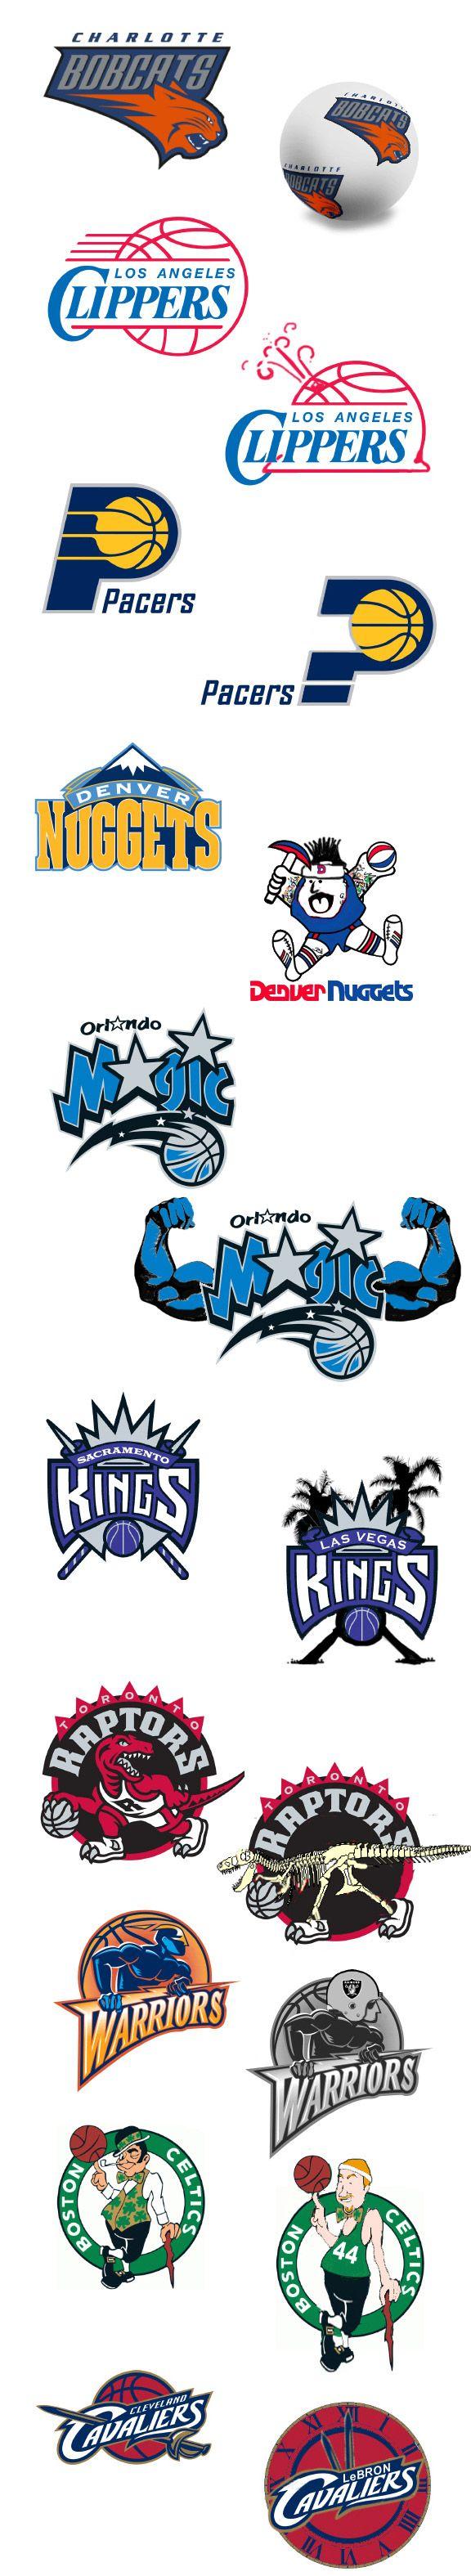 New NBA Logo - Page 2 unveils new and improved NBA team logos to celebrate the tip ...